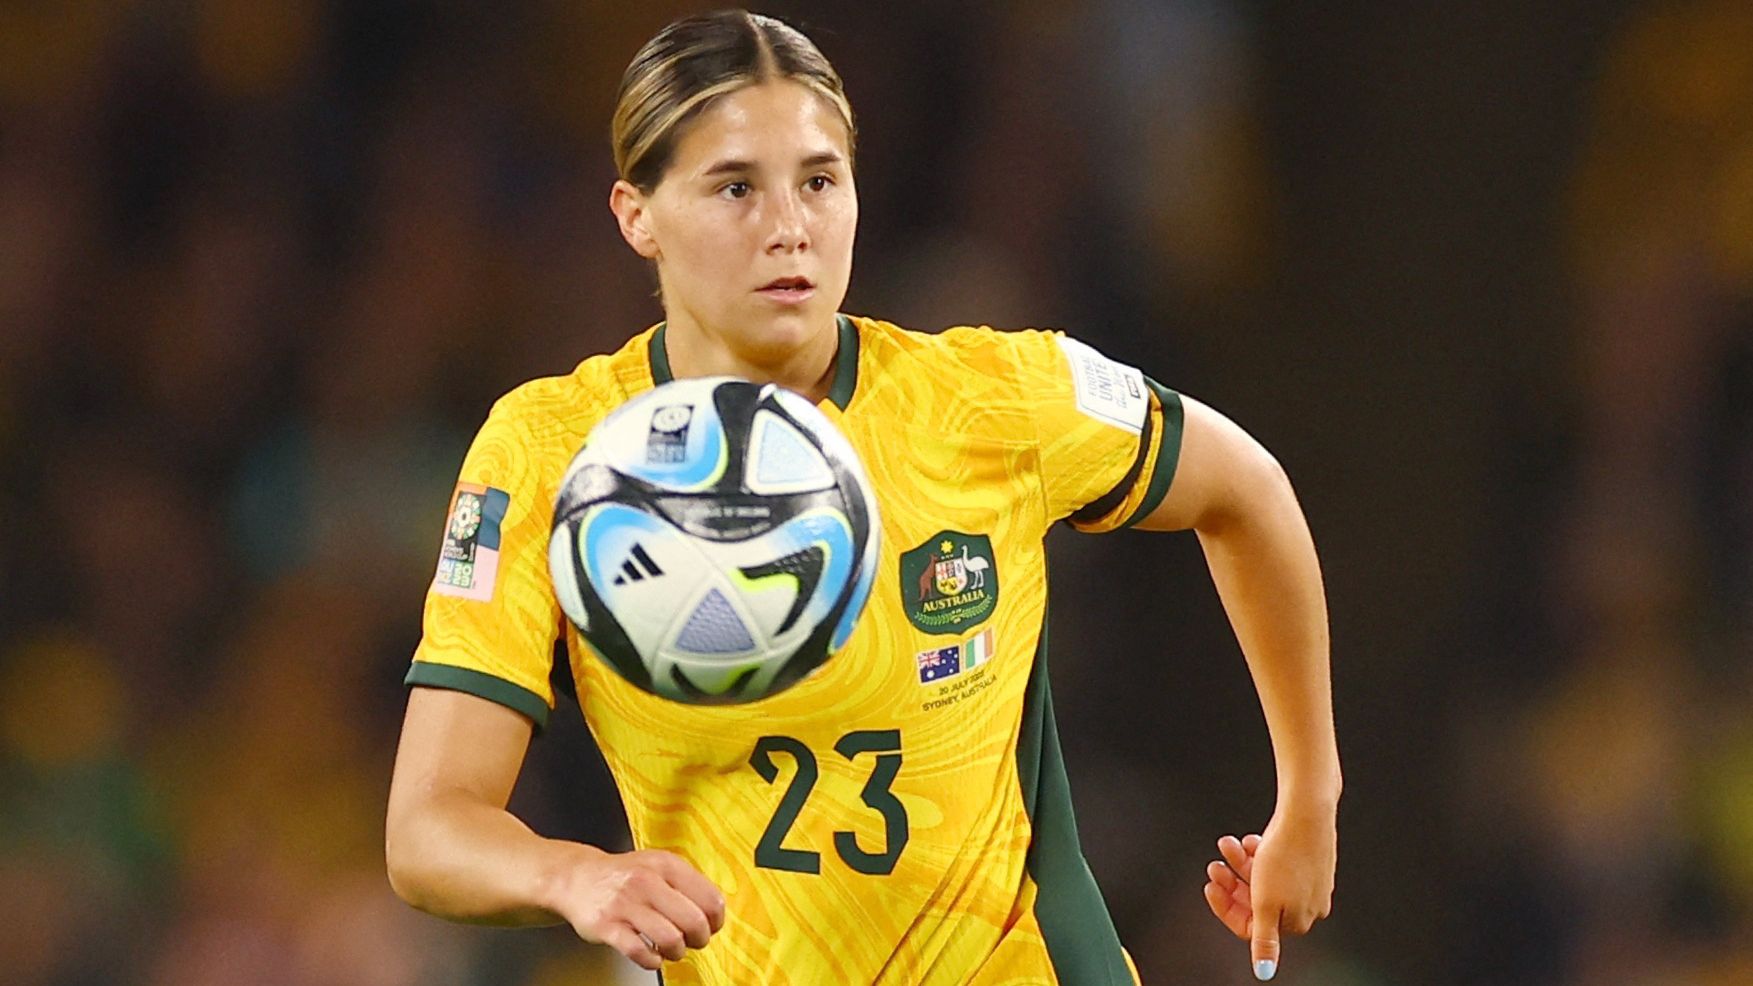 'Explosive' young Matildas star earns Arsenal contract after World Cup heroics